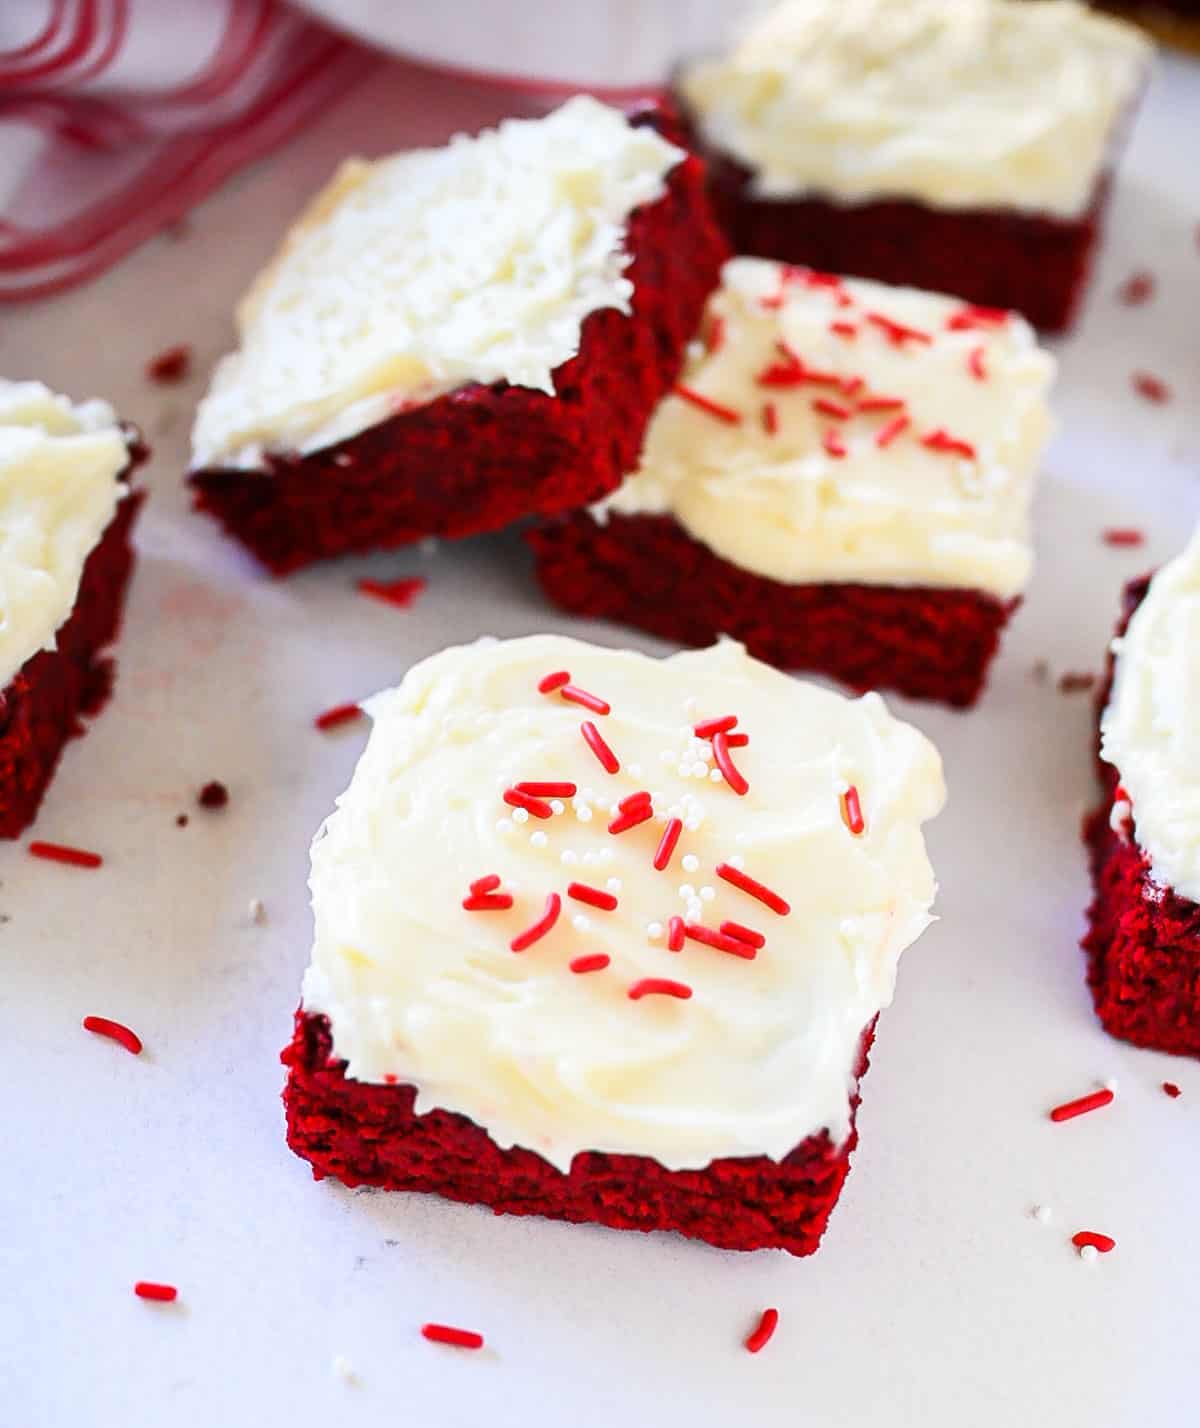 Sliced red velvet brownies with icing and sprinkles on a white tray.